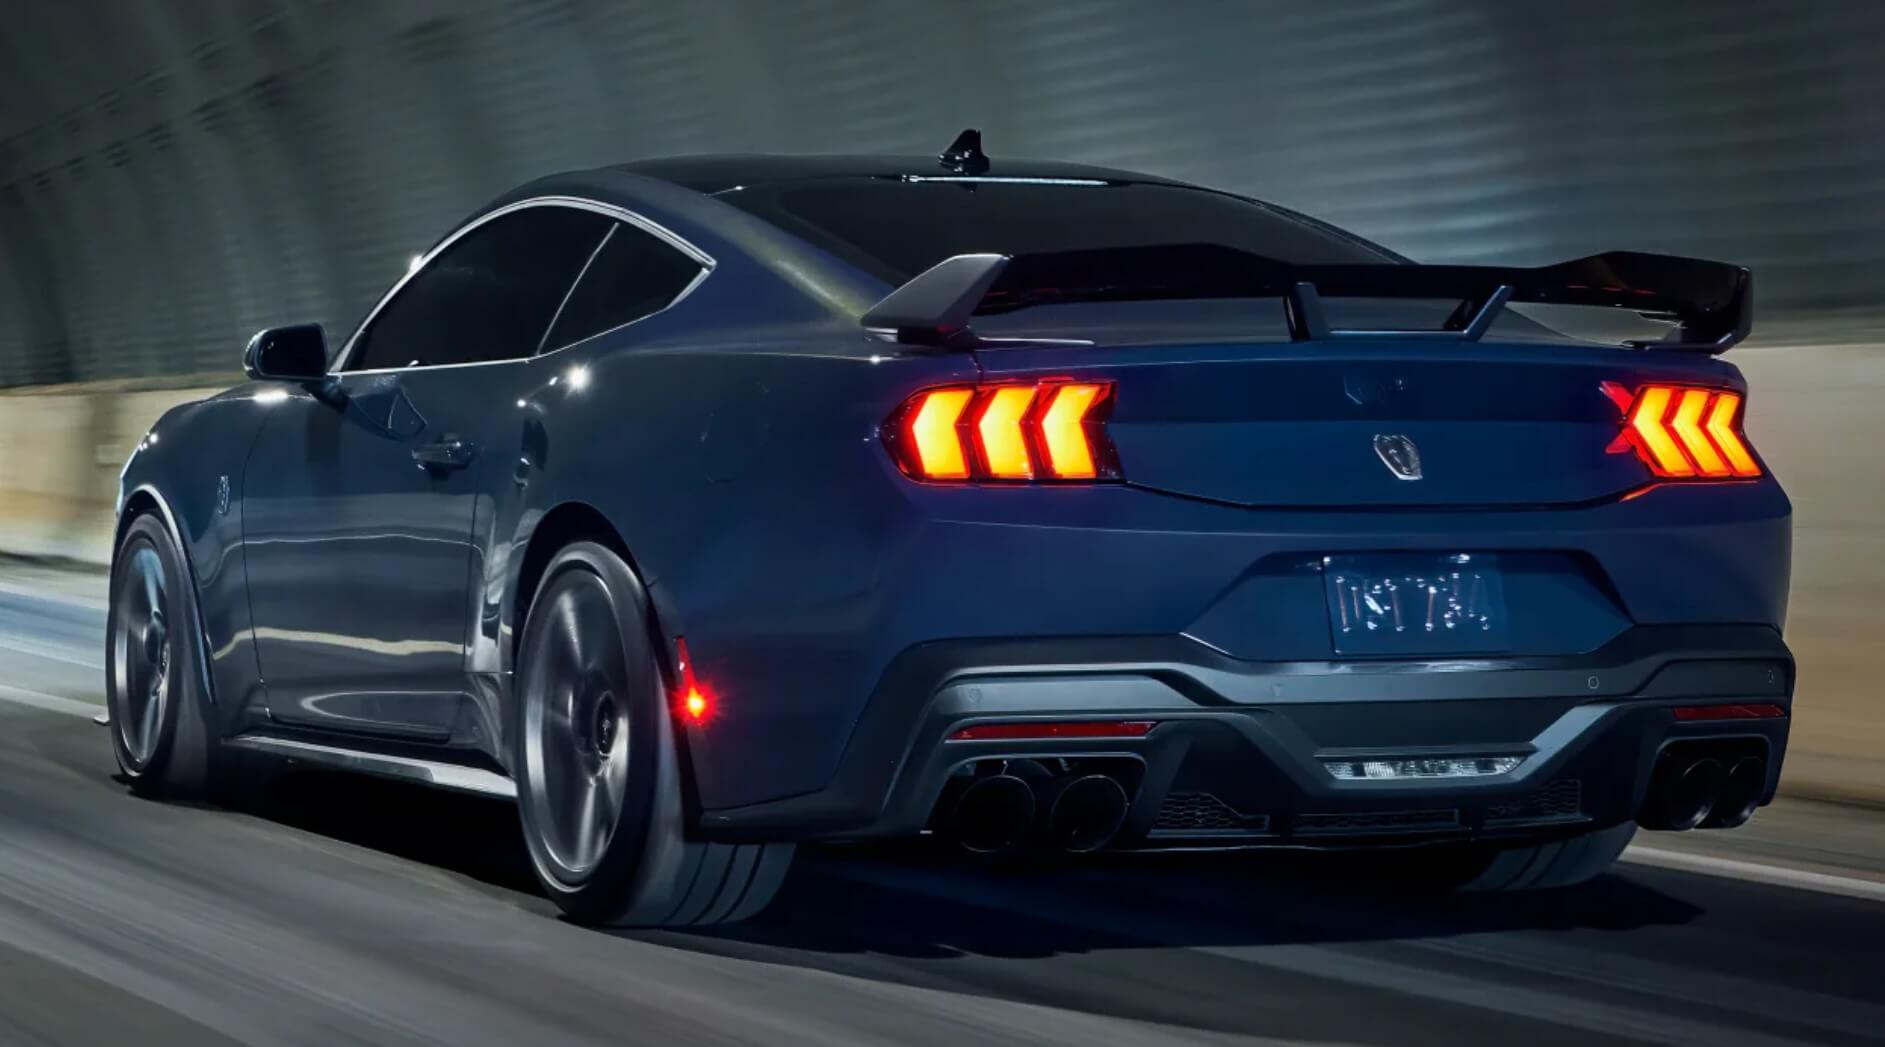 Ford Mustang Dark Horse revealed - Automotive Daily